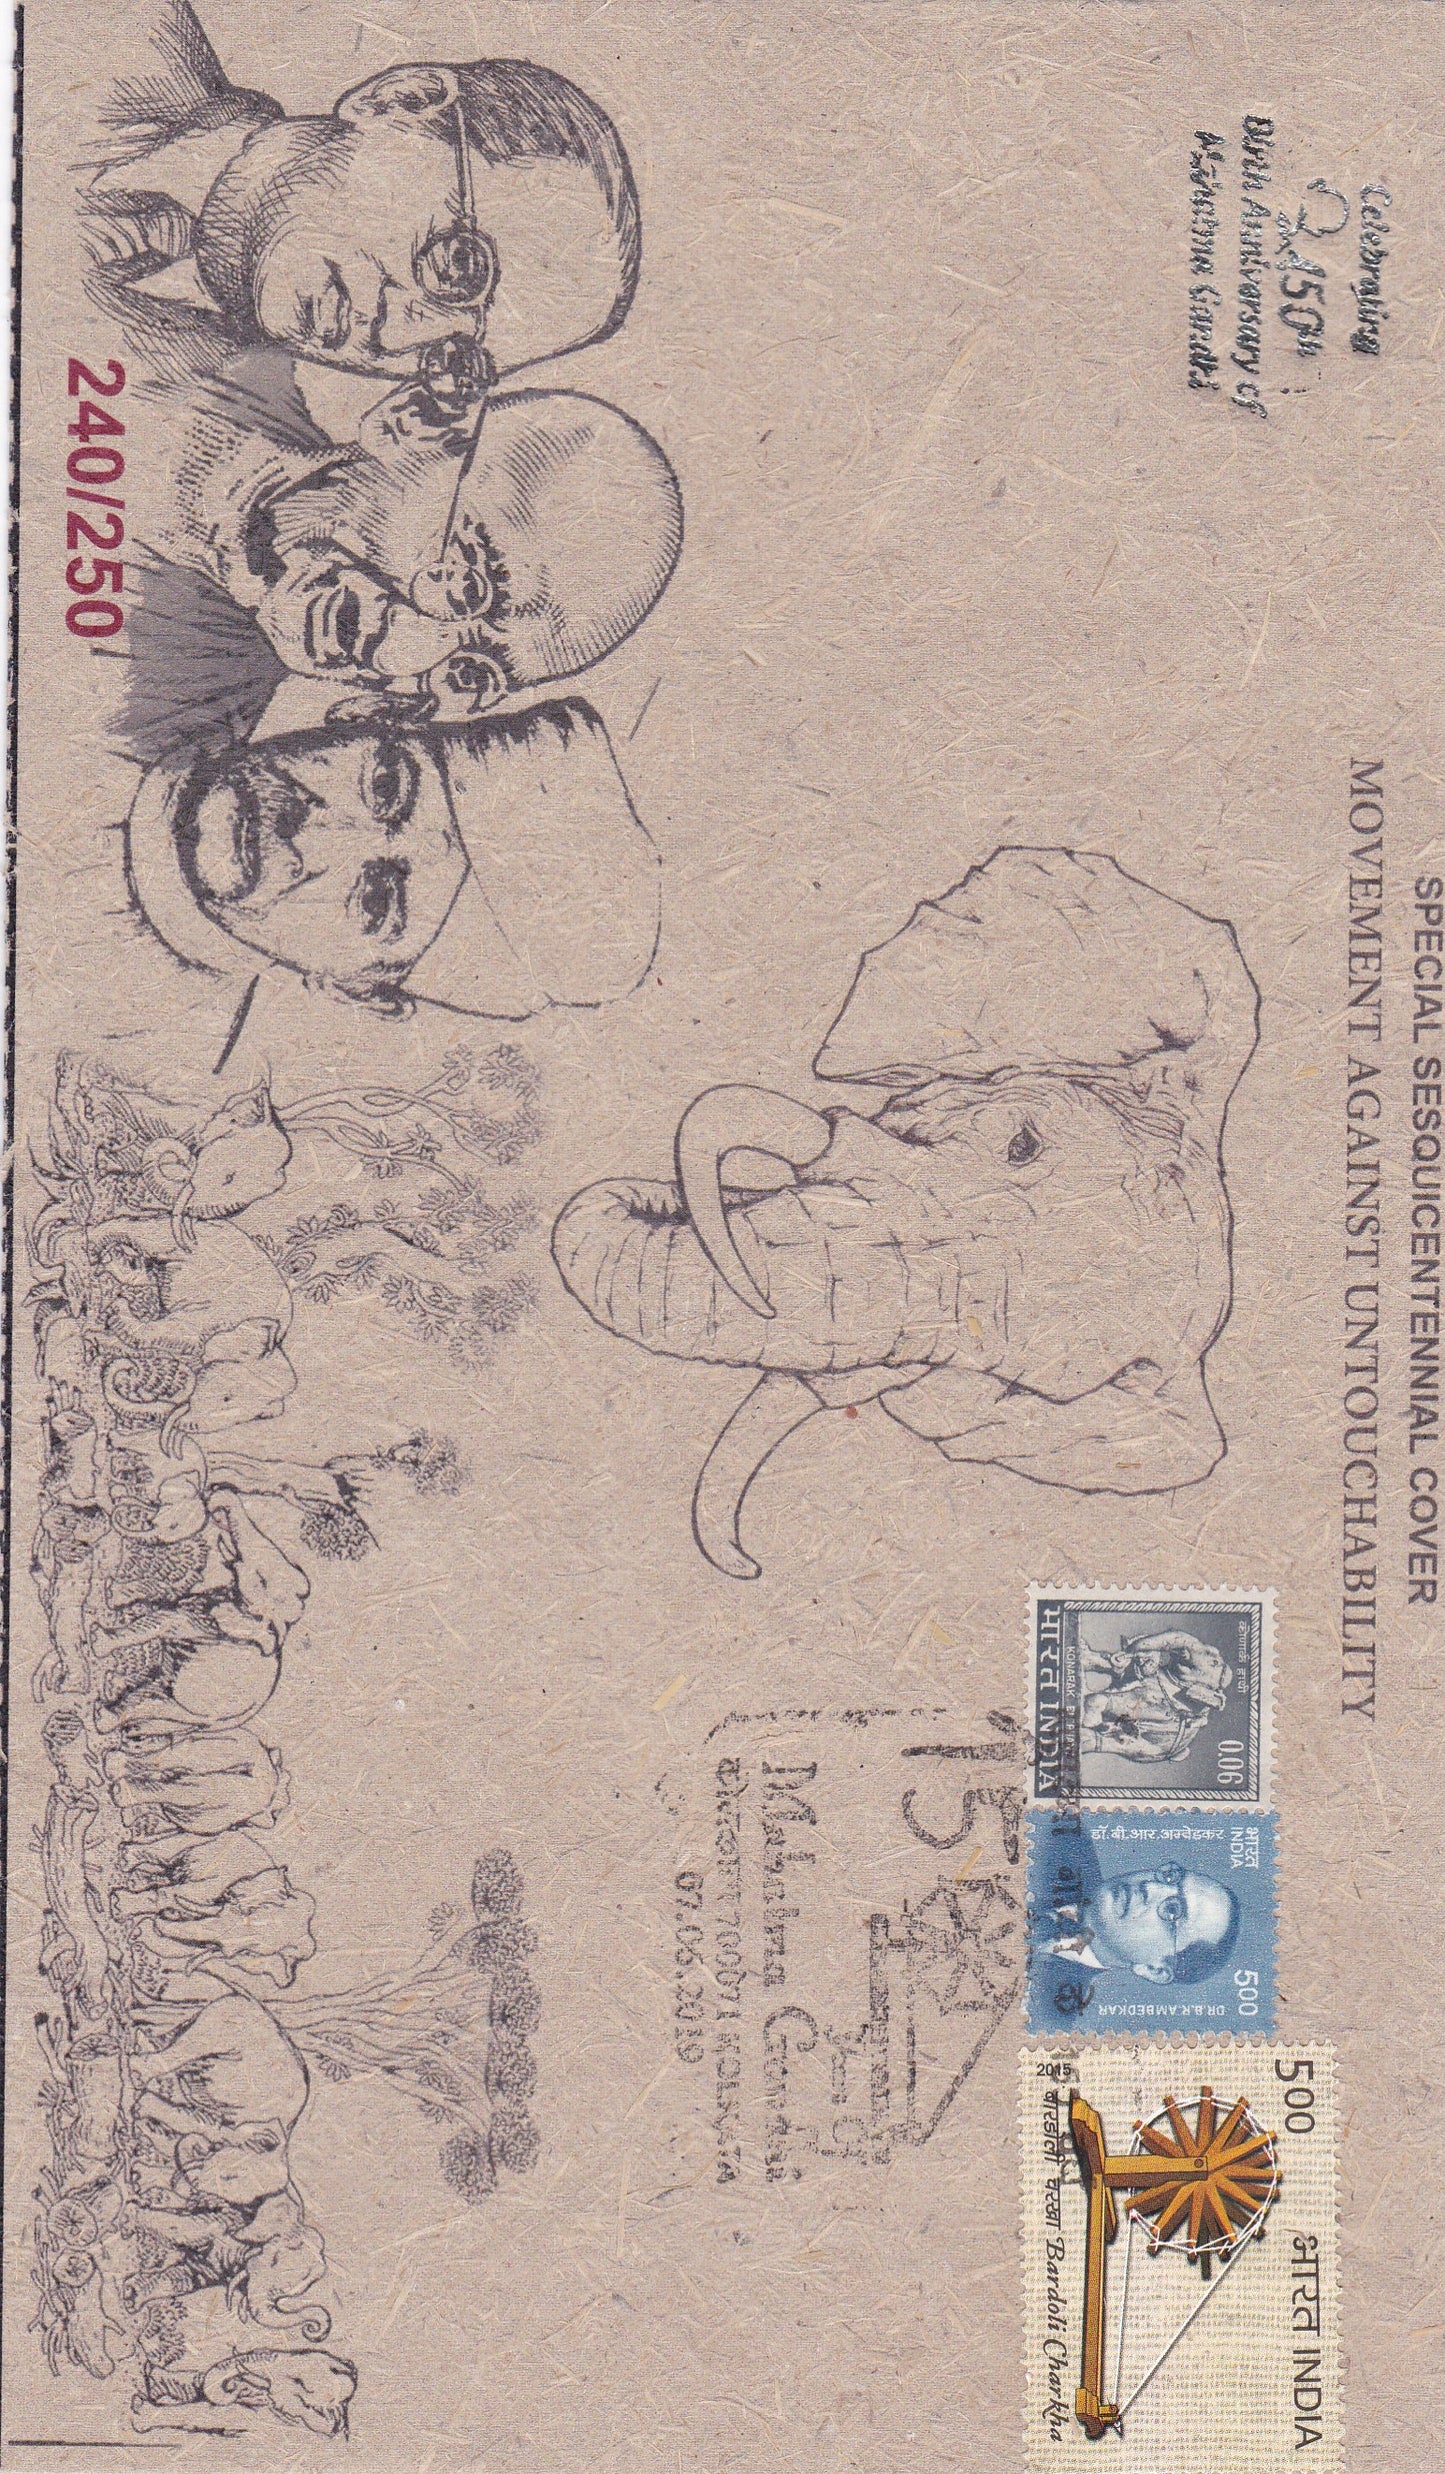 Four innovative eco friendly covers on Gandhiji.